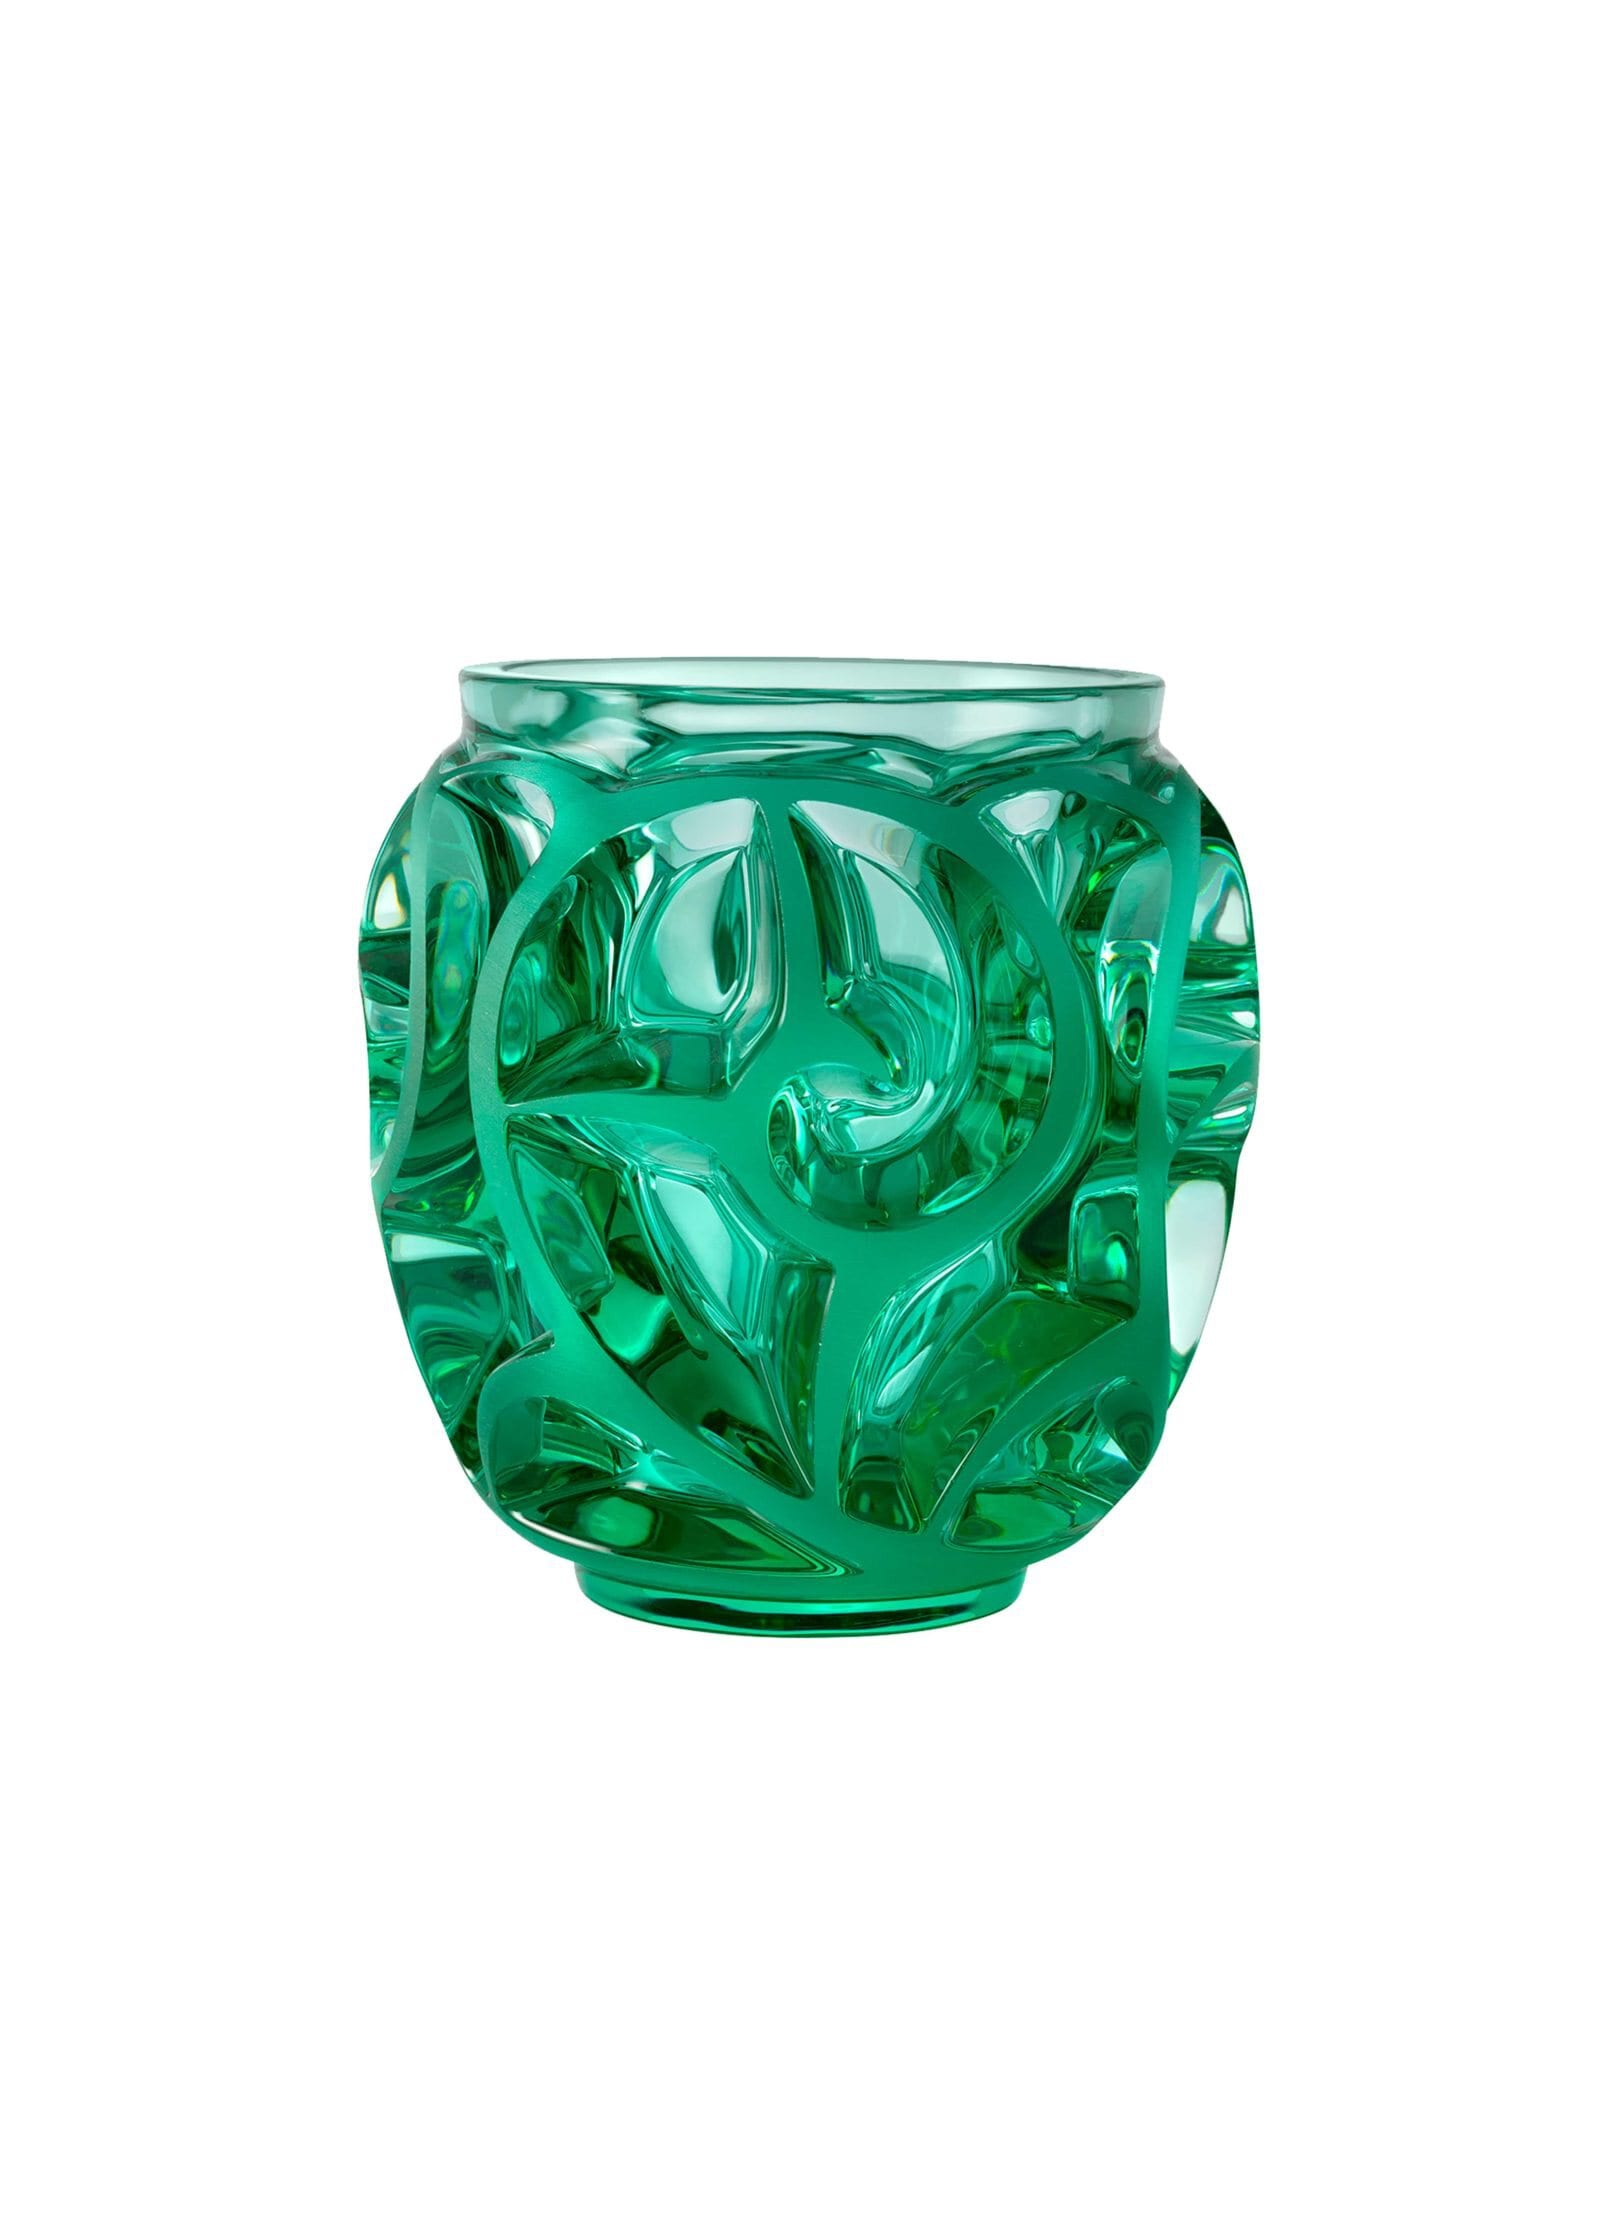 Tourbillons Small Vase in Mint Crystal